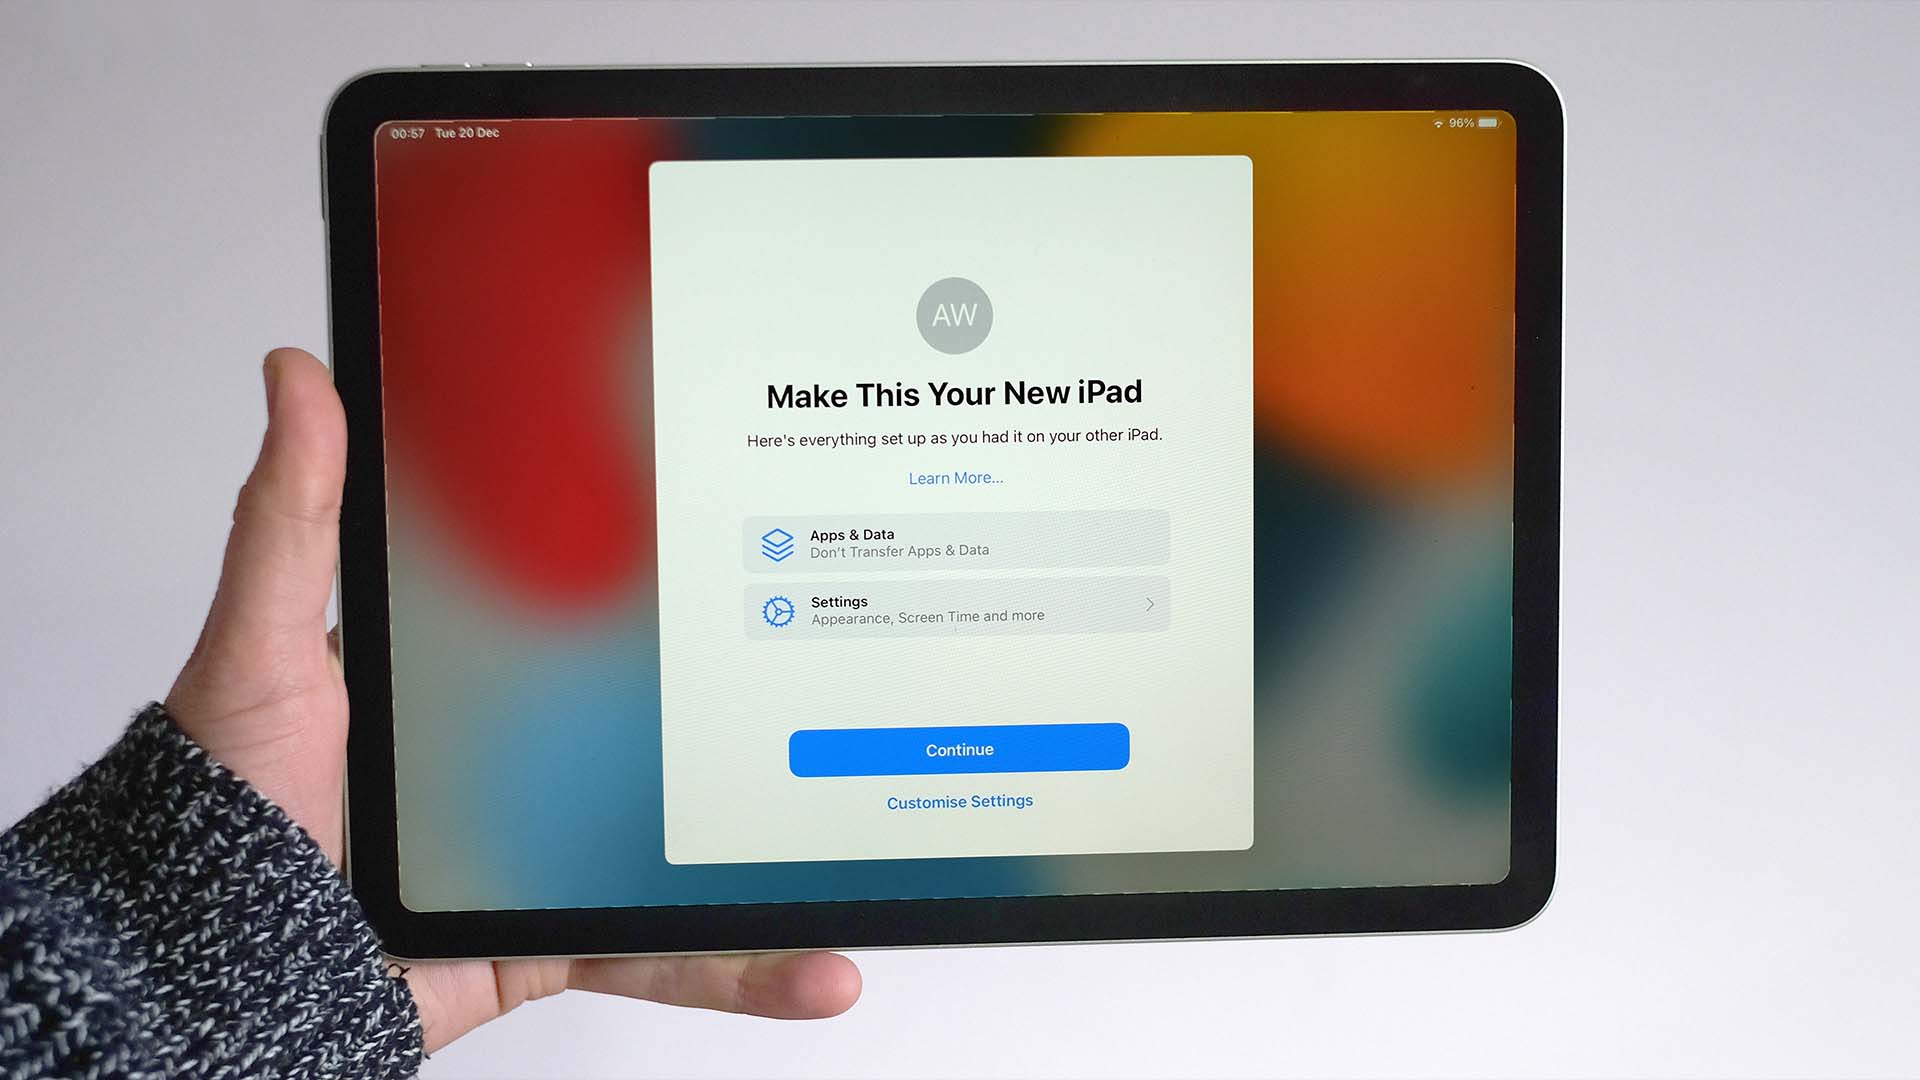 An iPad with the screen showing the Make This Your New iPad screen